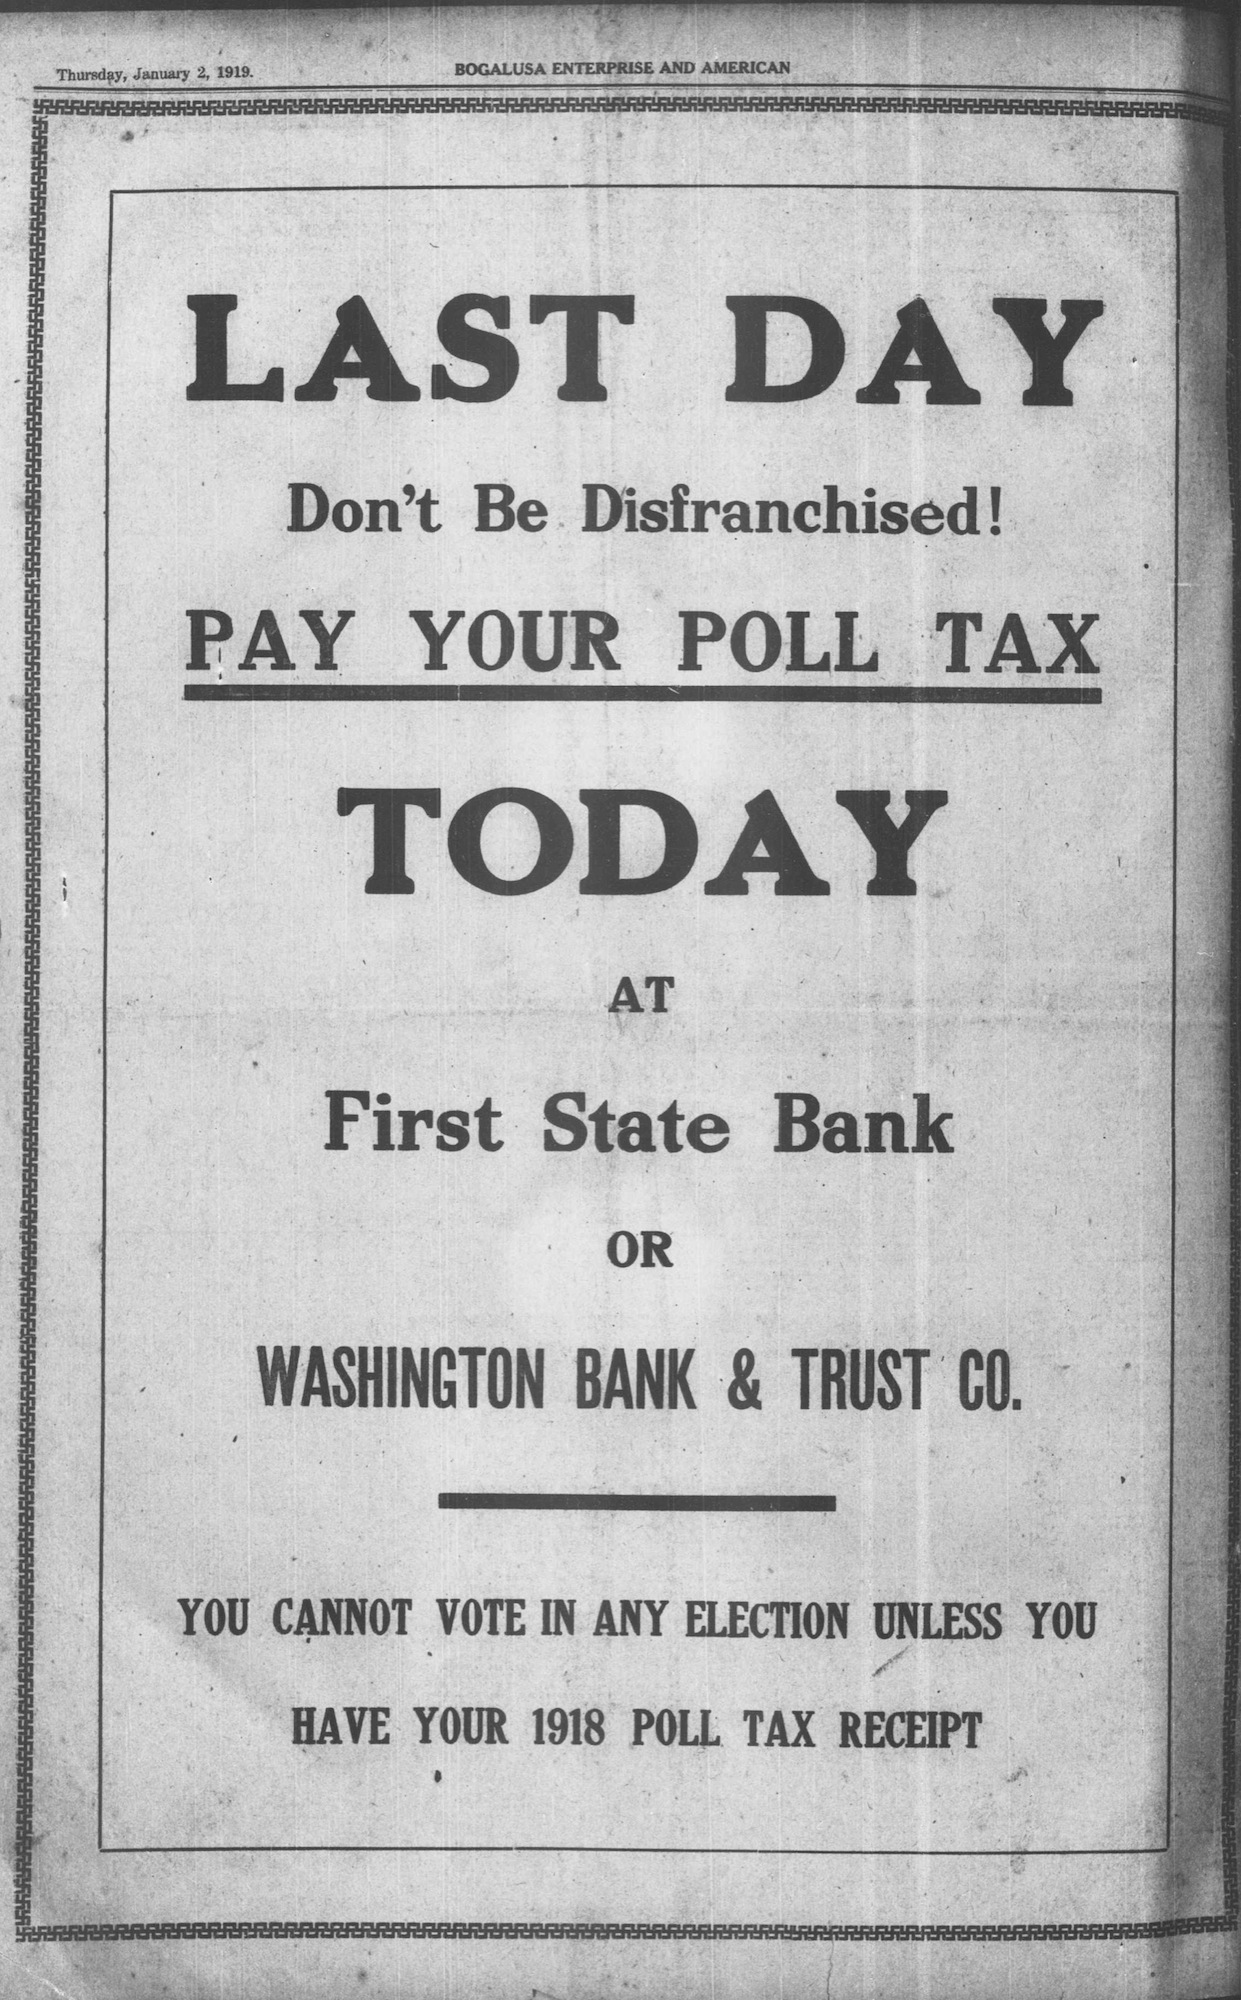 Pay Your Poll Tax Today!